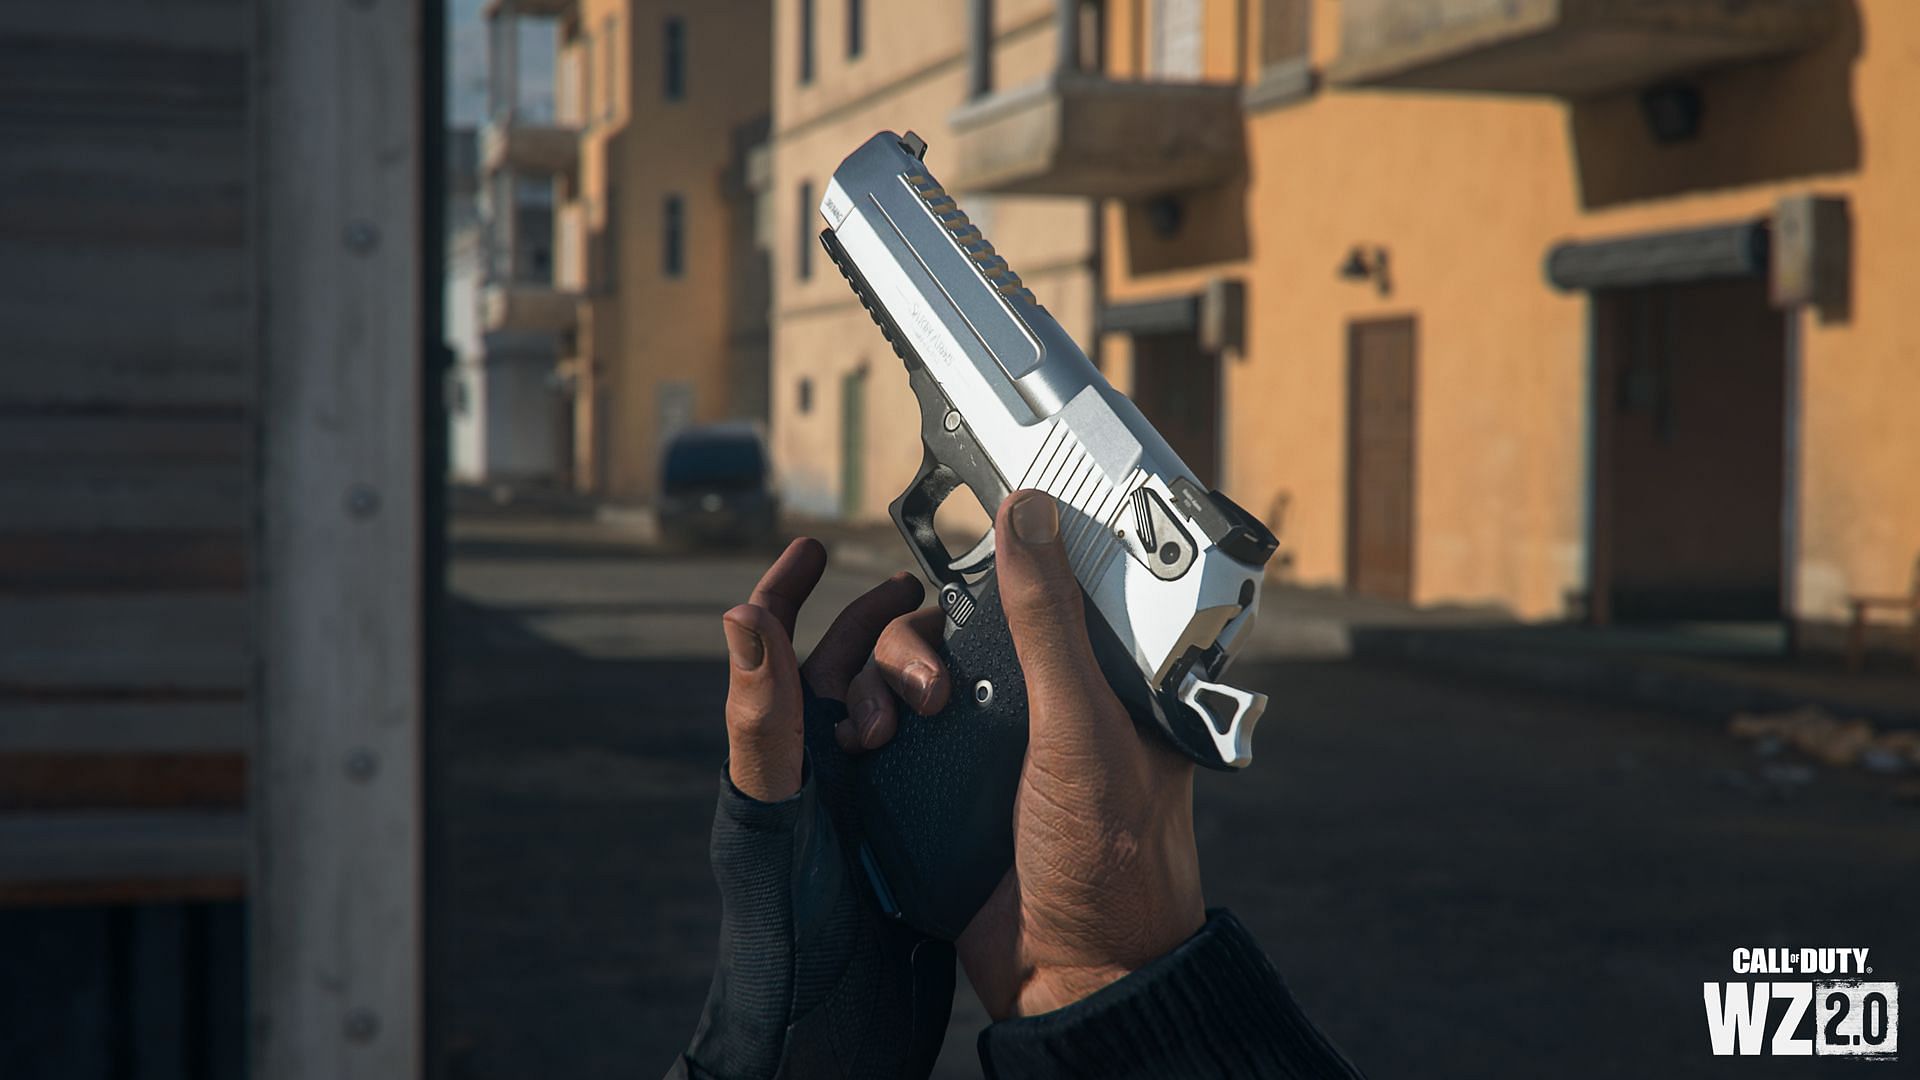 The GS Magna pistol in Modern Warfare 2 and Warzone 2 Season 3 Reloaded (Image via Activision)